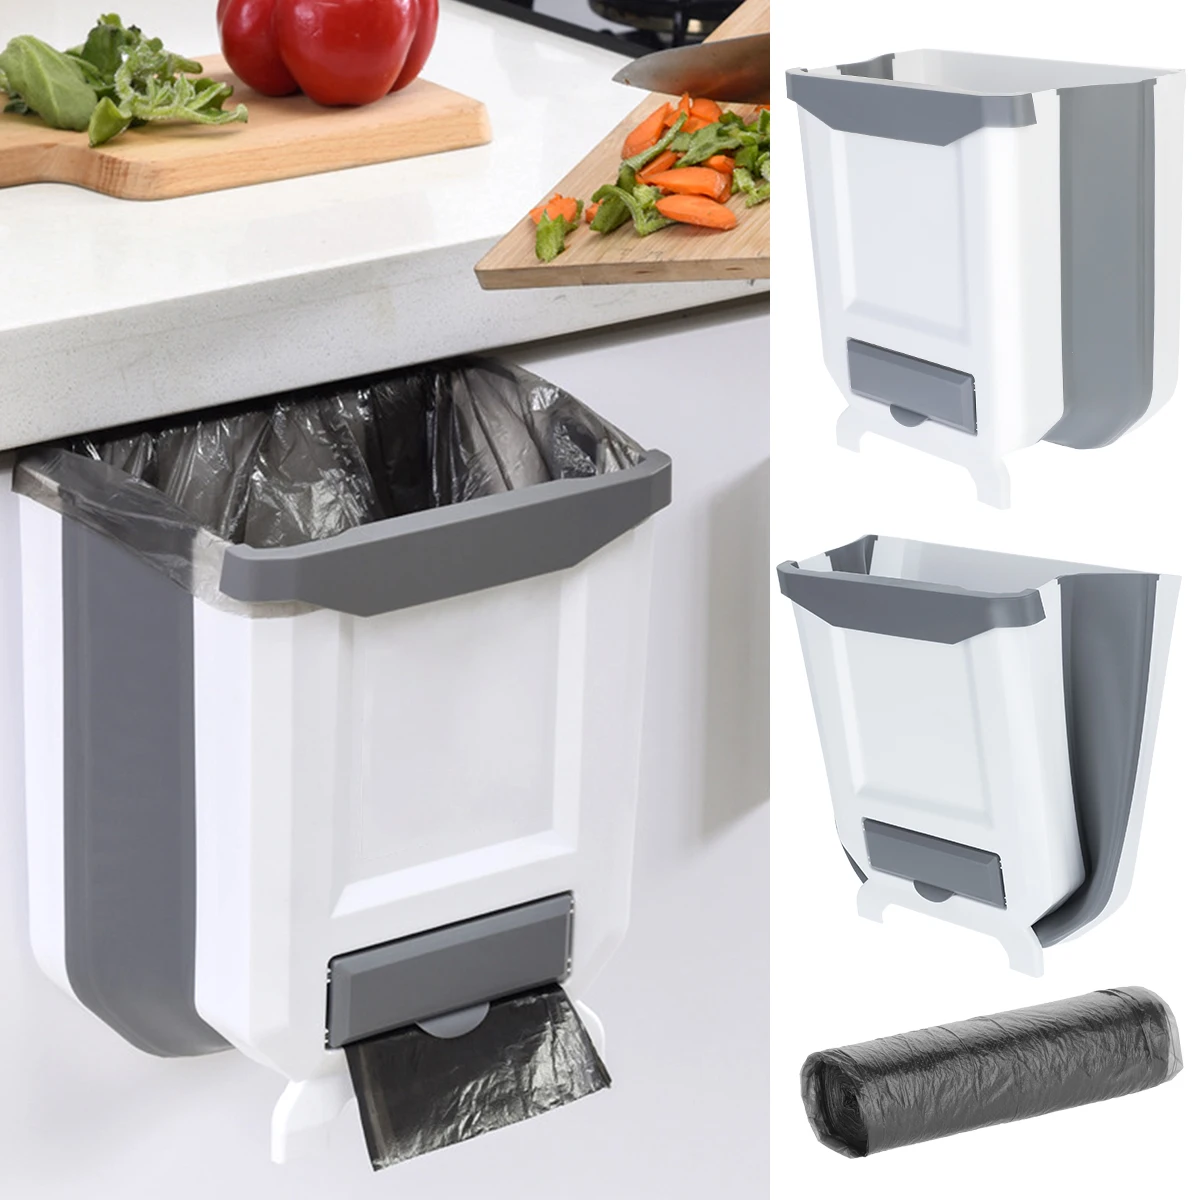 

Kitchen Hanging Trash Bin Small Compact Foldable Garbage Can Attached To Cabinet Door Drawer Bedroom Dorm Room Car Office, Colour